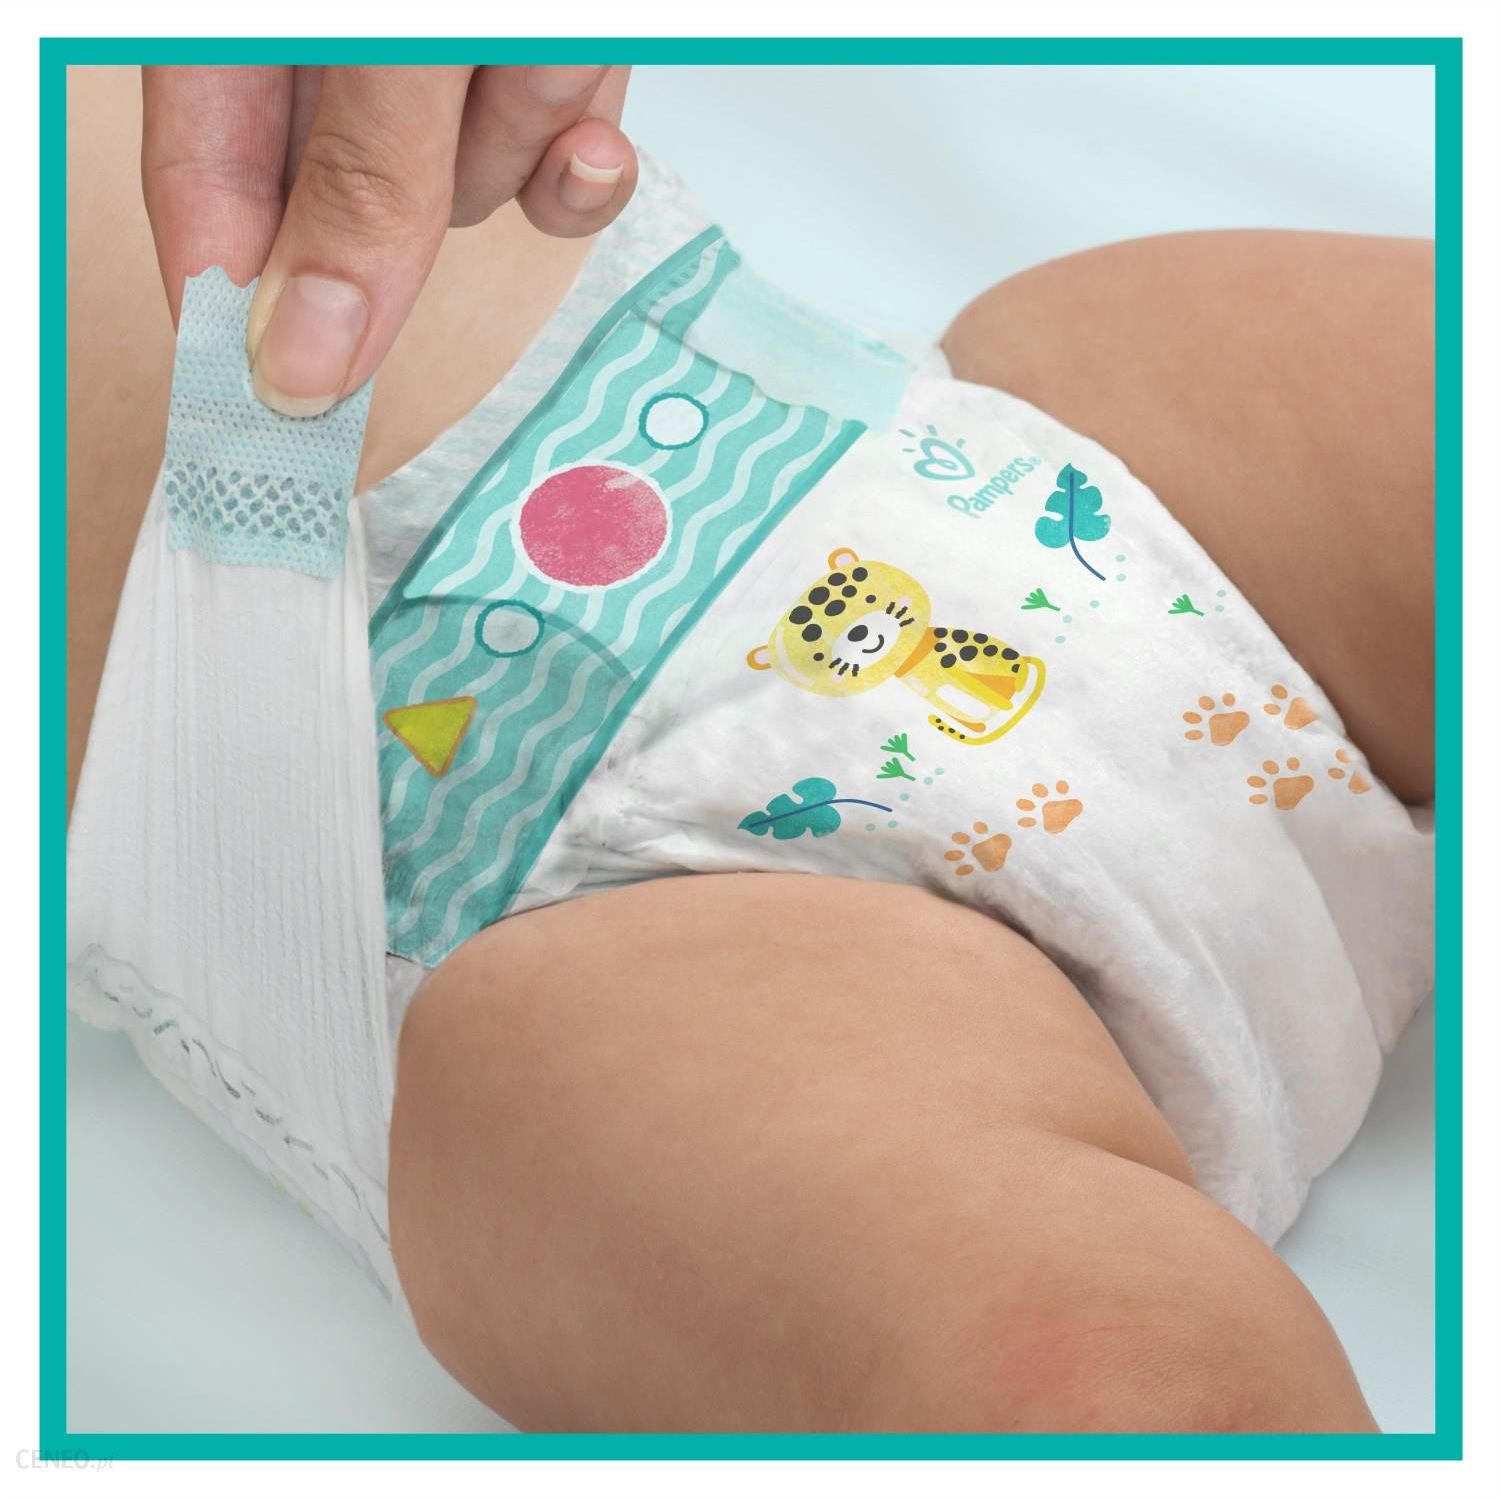 pampers active baby dry 5 ceneo